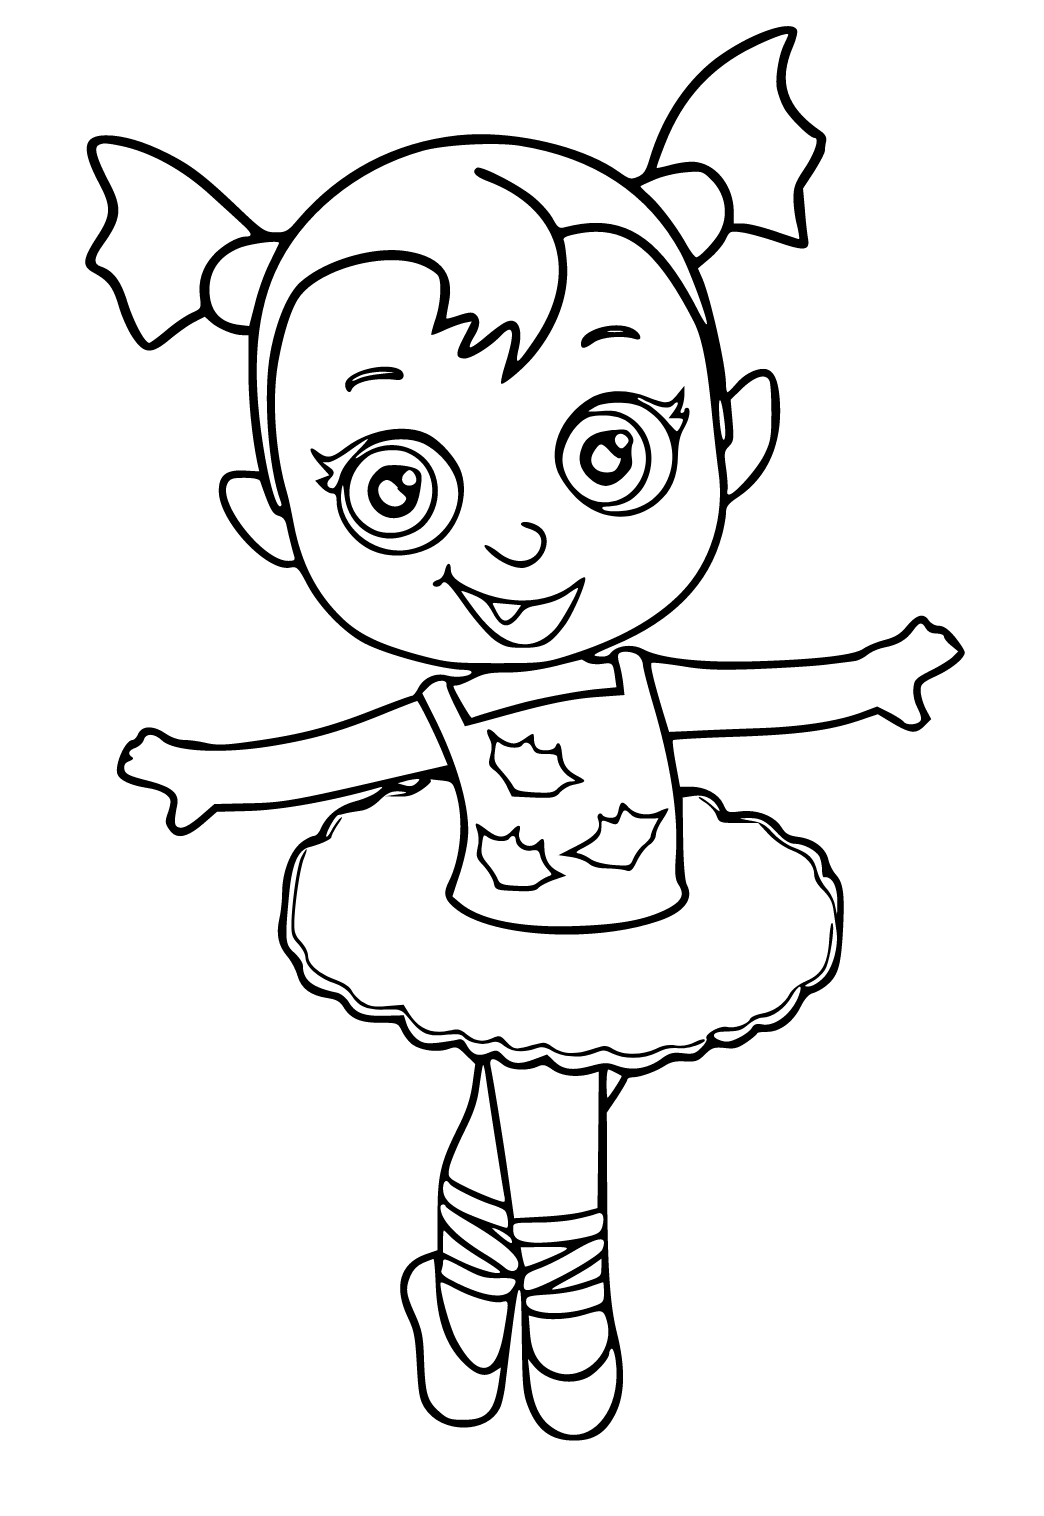 Free Printable Vampirina Joy Coloring Page Sheet and Picture for Adults  and Kids Girls and Boys  Babeledcom